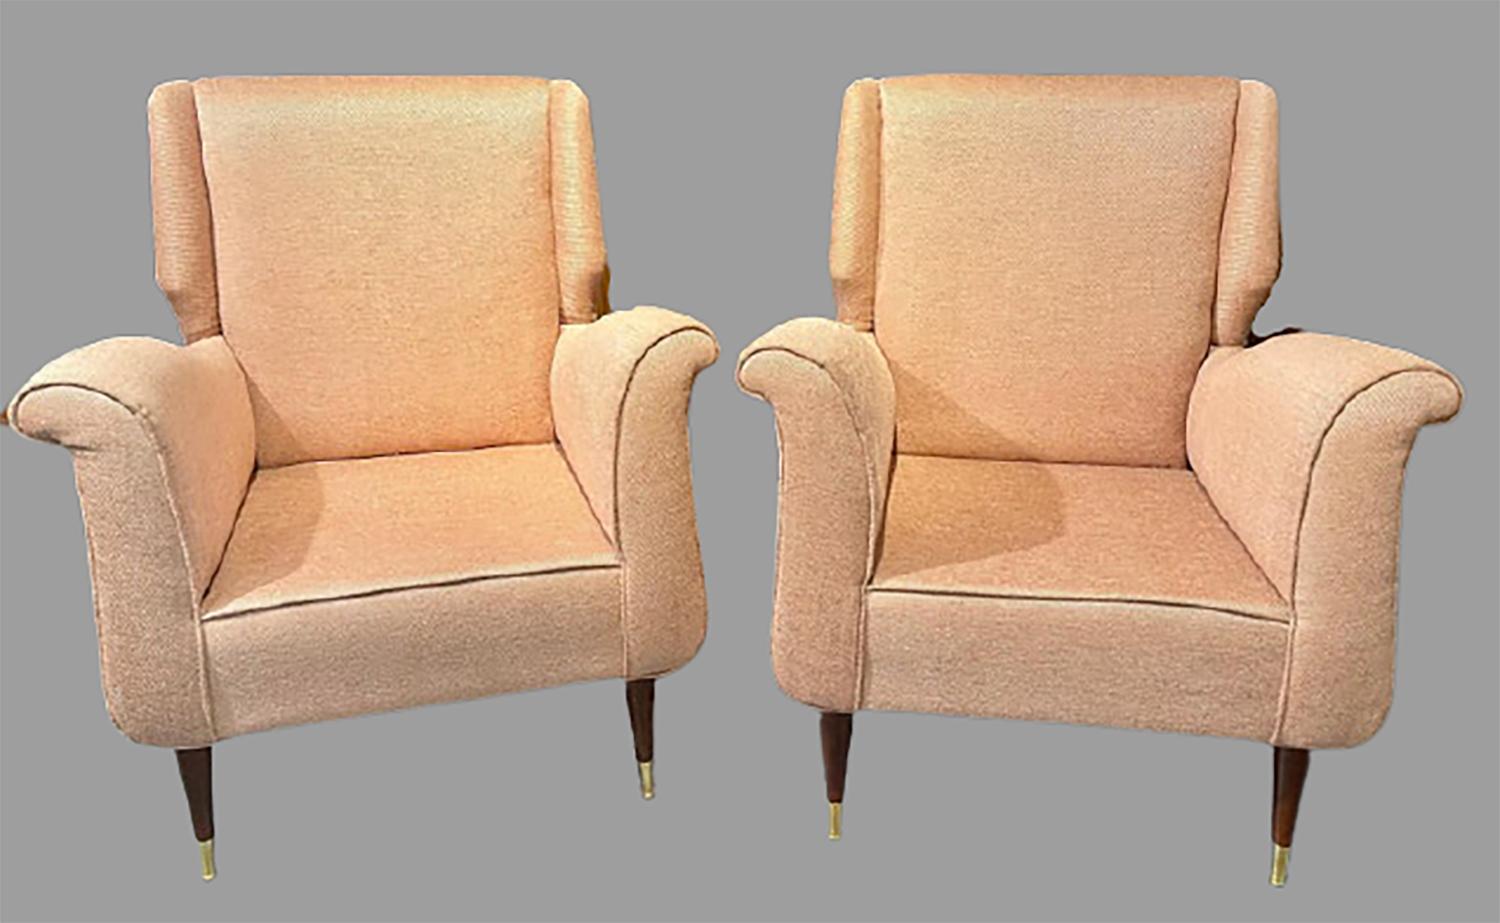 Pair of Mid-Century Modern Gio Ponti style arm or wingback chairs. These finely detailed sleek and stylish armchairs depict this iconic designer’s style for flair and simplicity at his highest level. The tapering mahogany legs sitting on brass